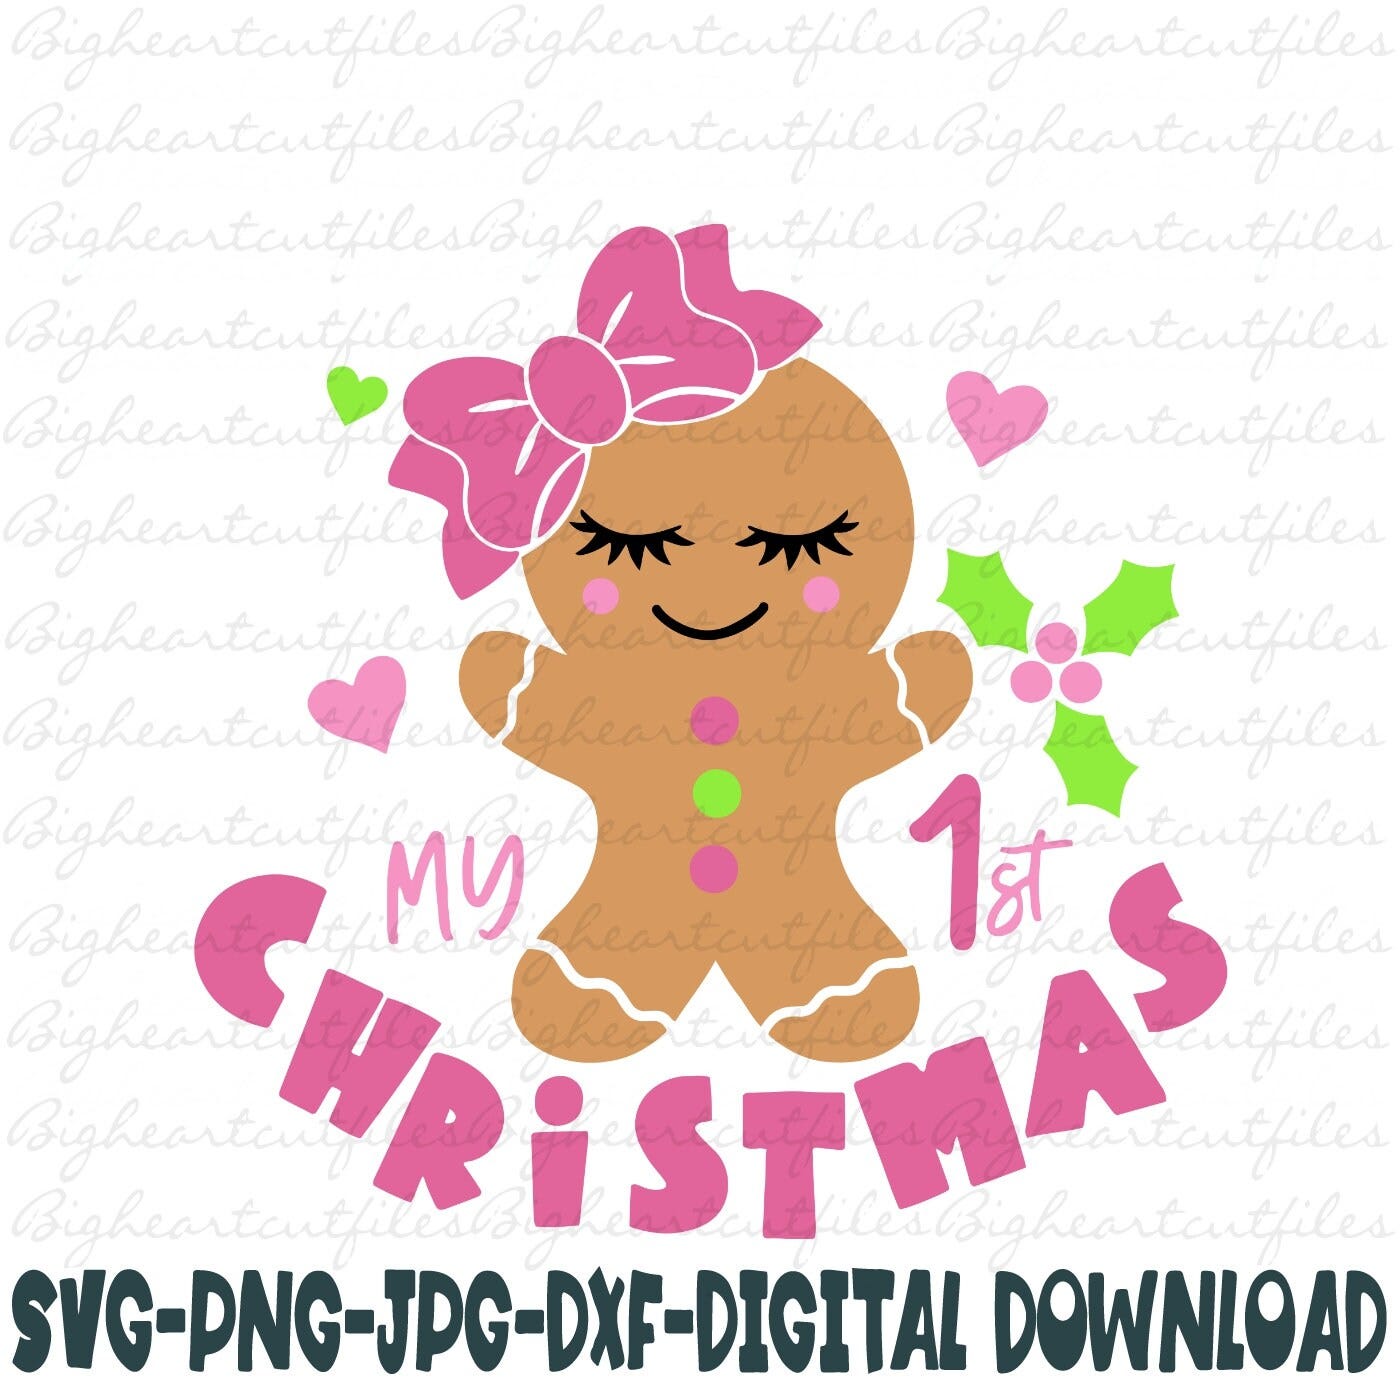 My First Christmas Svg, Png, Jpg, Dxf, Girl Gingerbread Svg, 1st Christmas Svg, Baby Girl Svg, 1st Christmas Cut File, Silhouette, Cricut